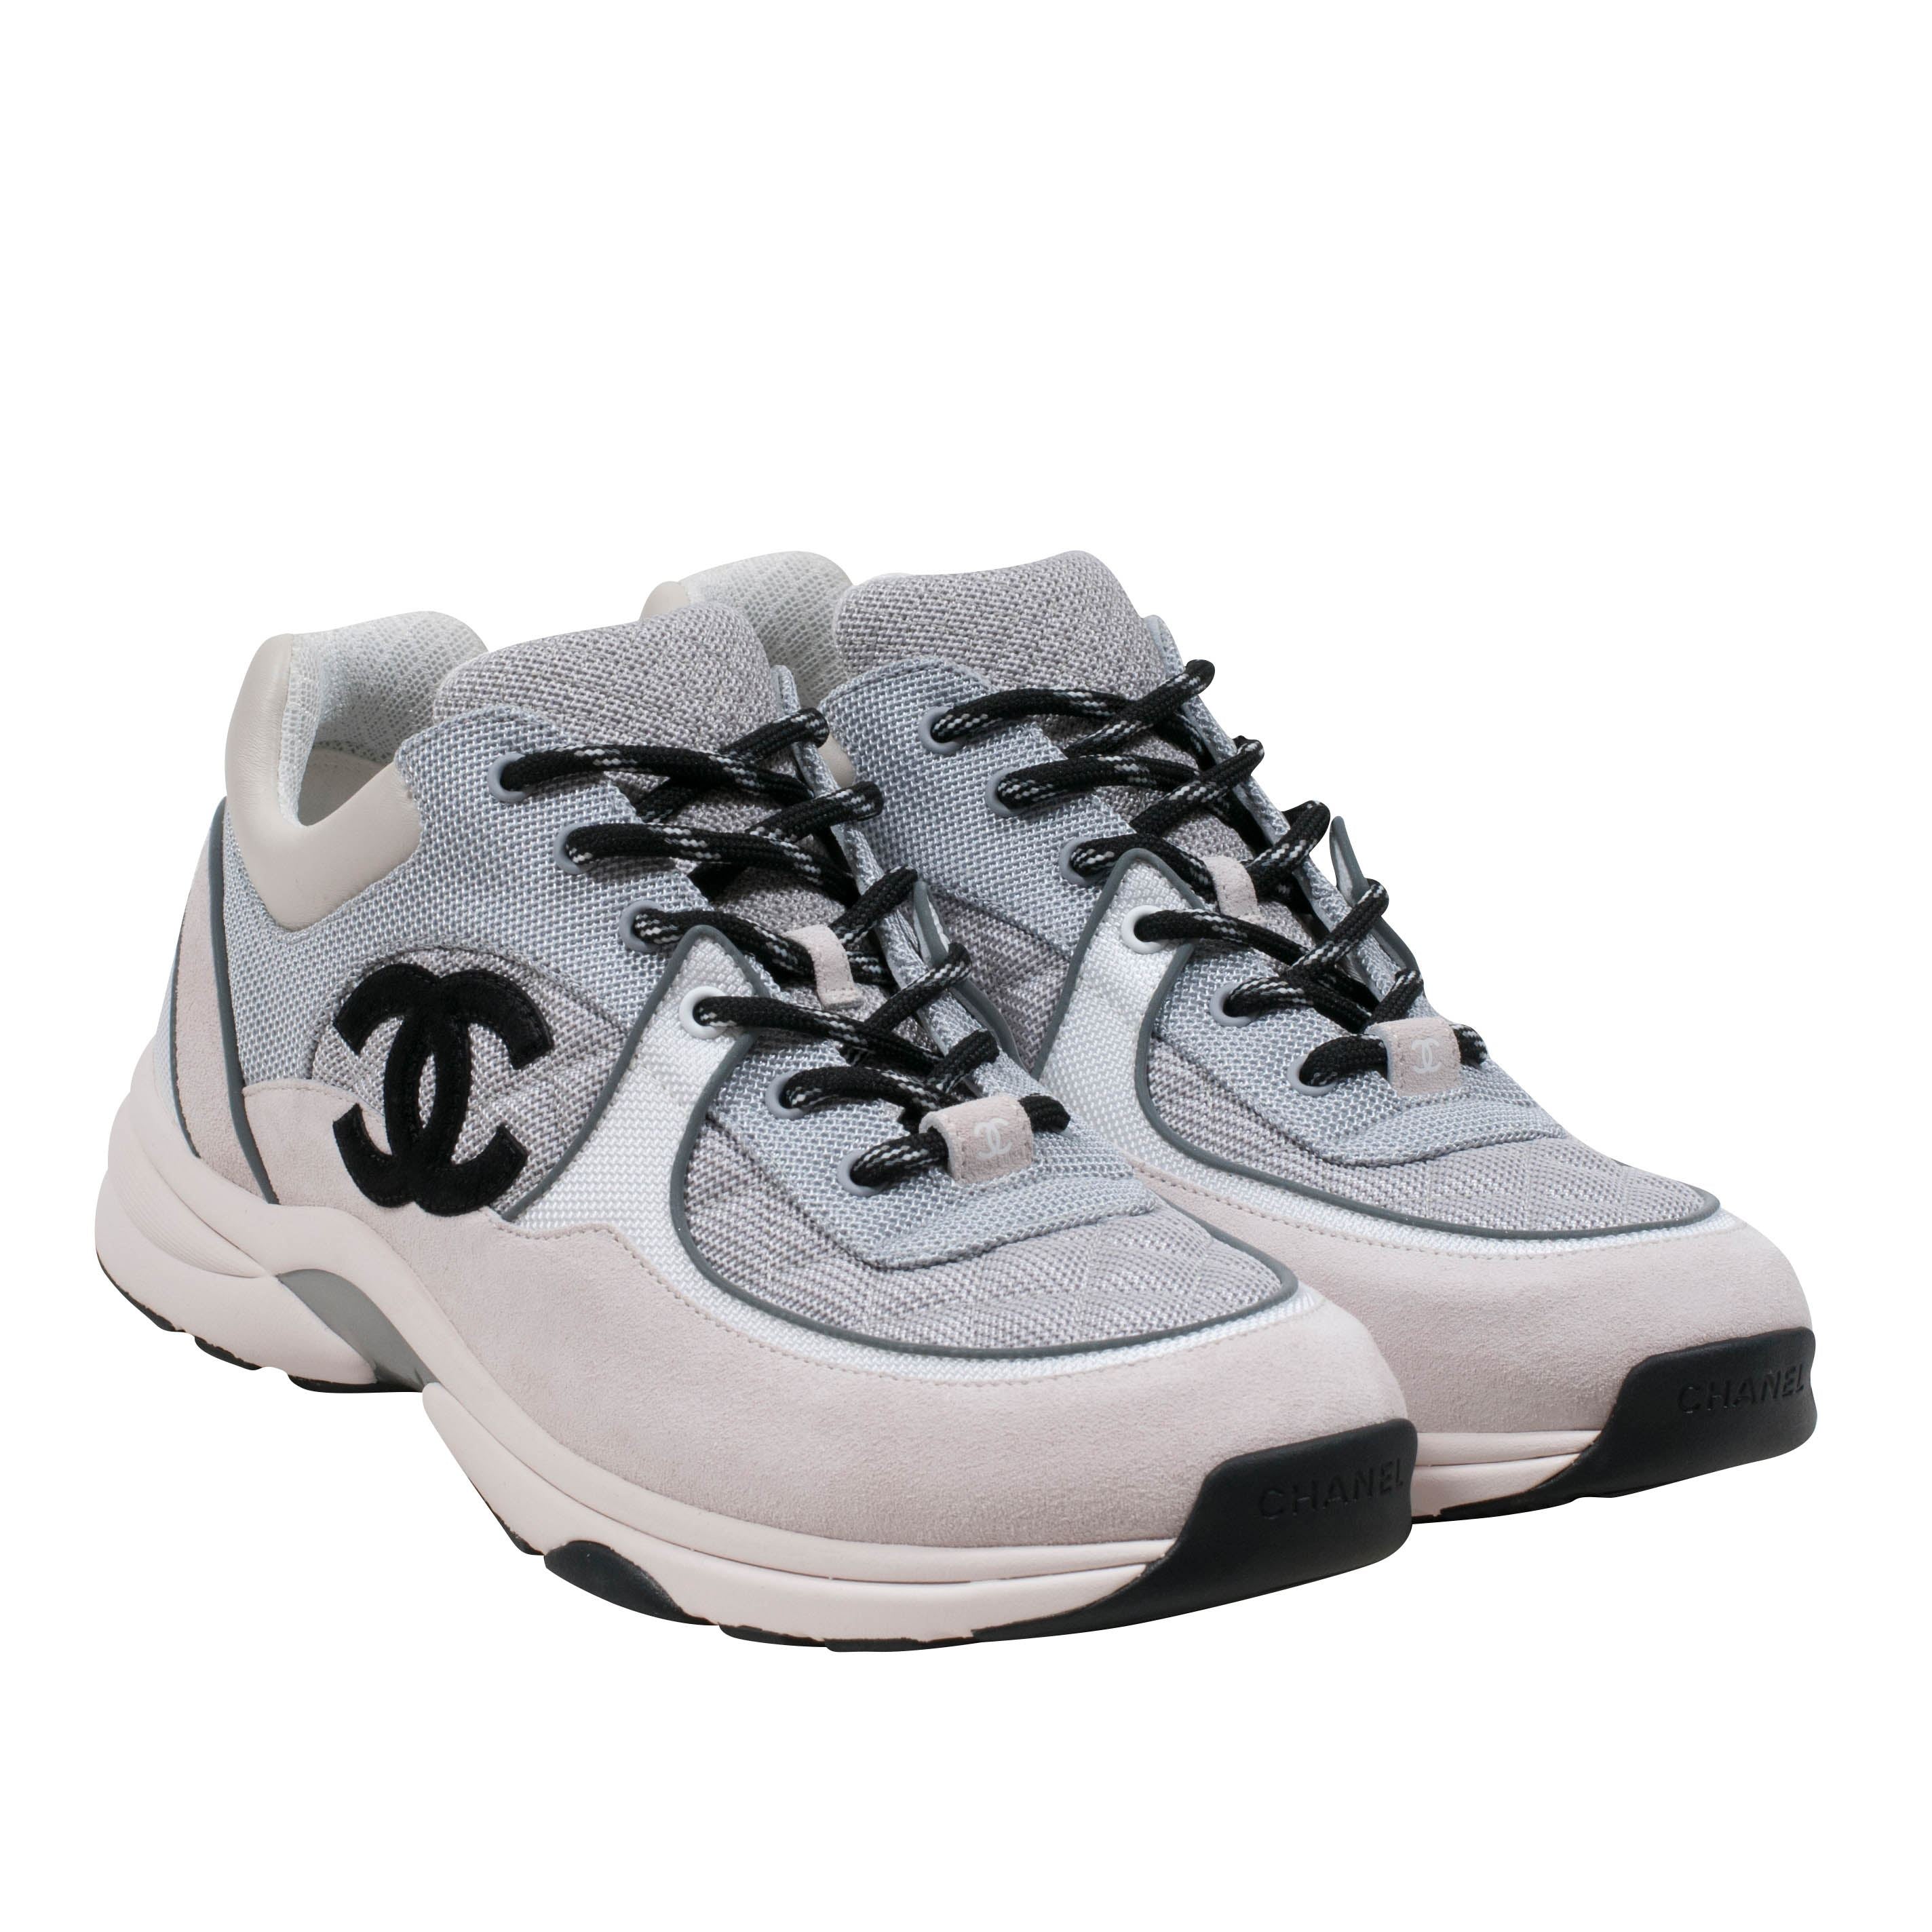 White Gray Sport Sprint Sneakers Trainers